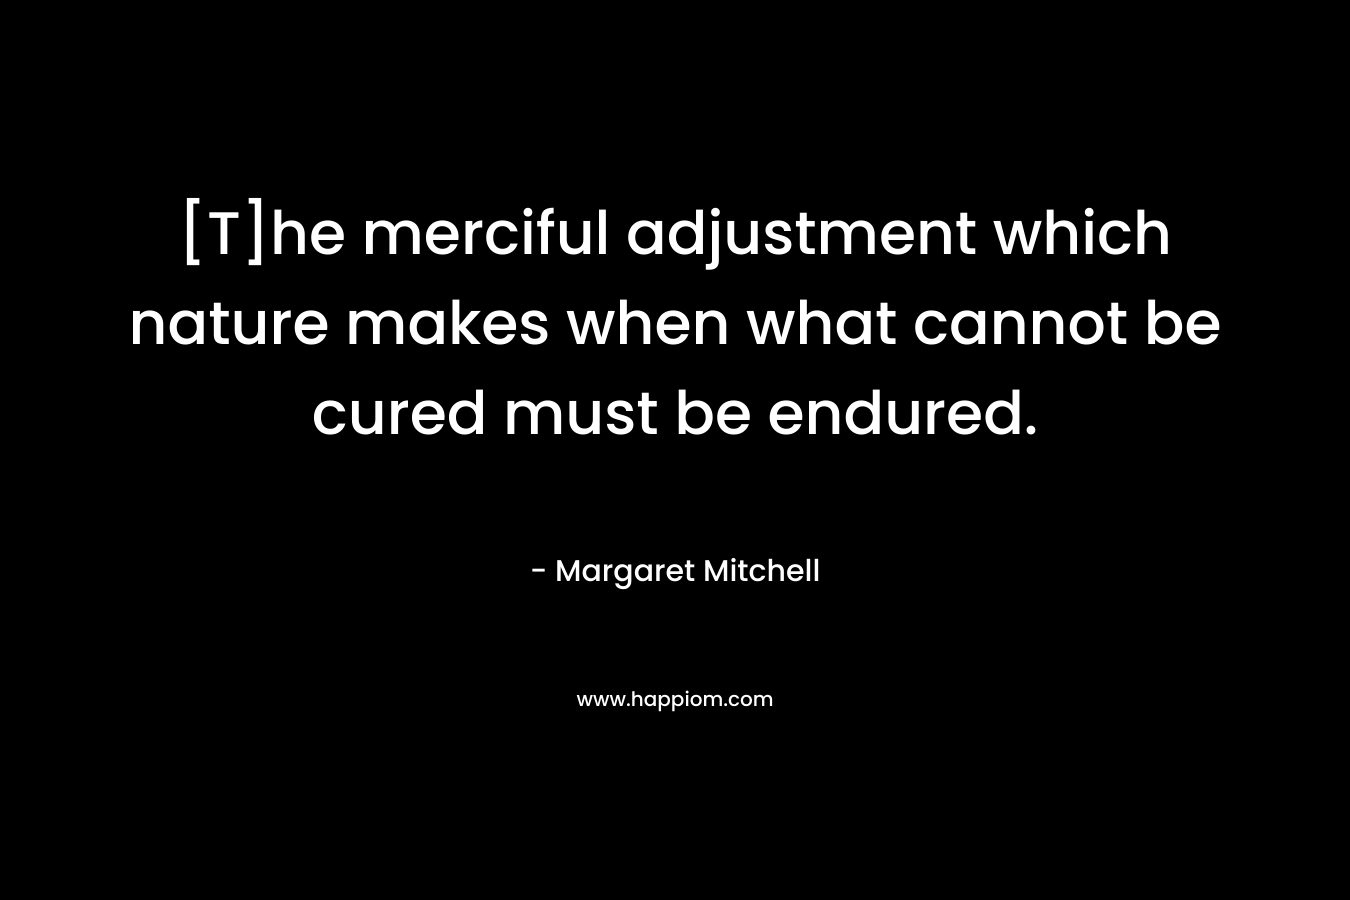 [T]he merciful adjustment which nature makes when what cannot be cured must be endured.